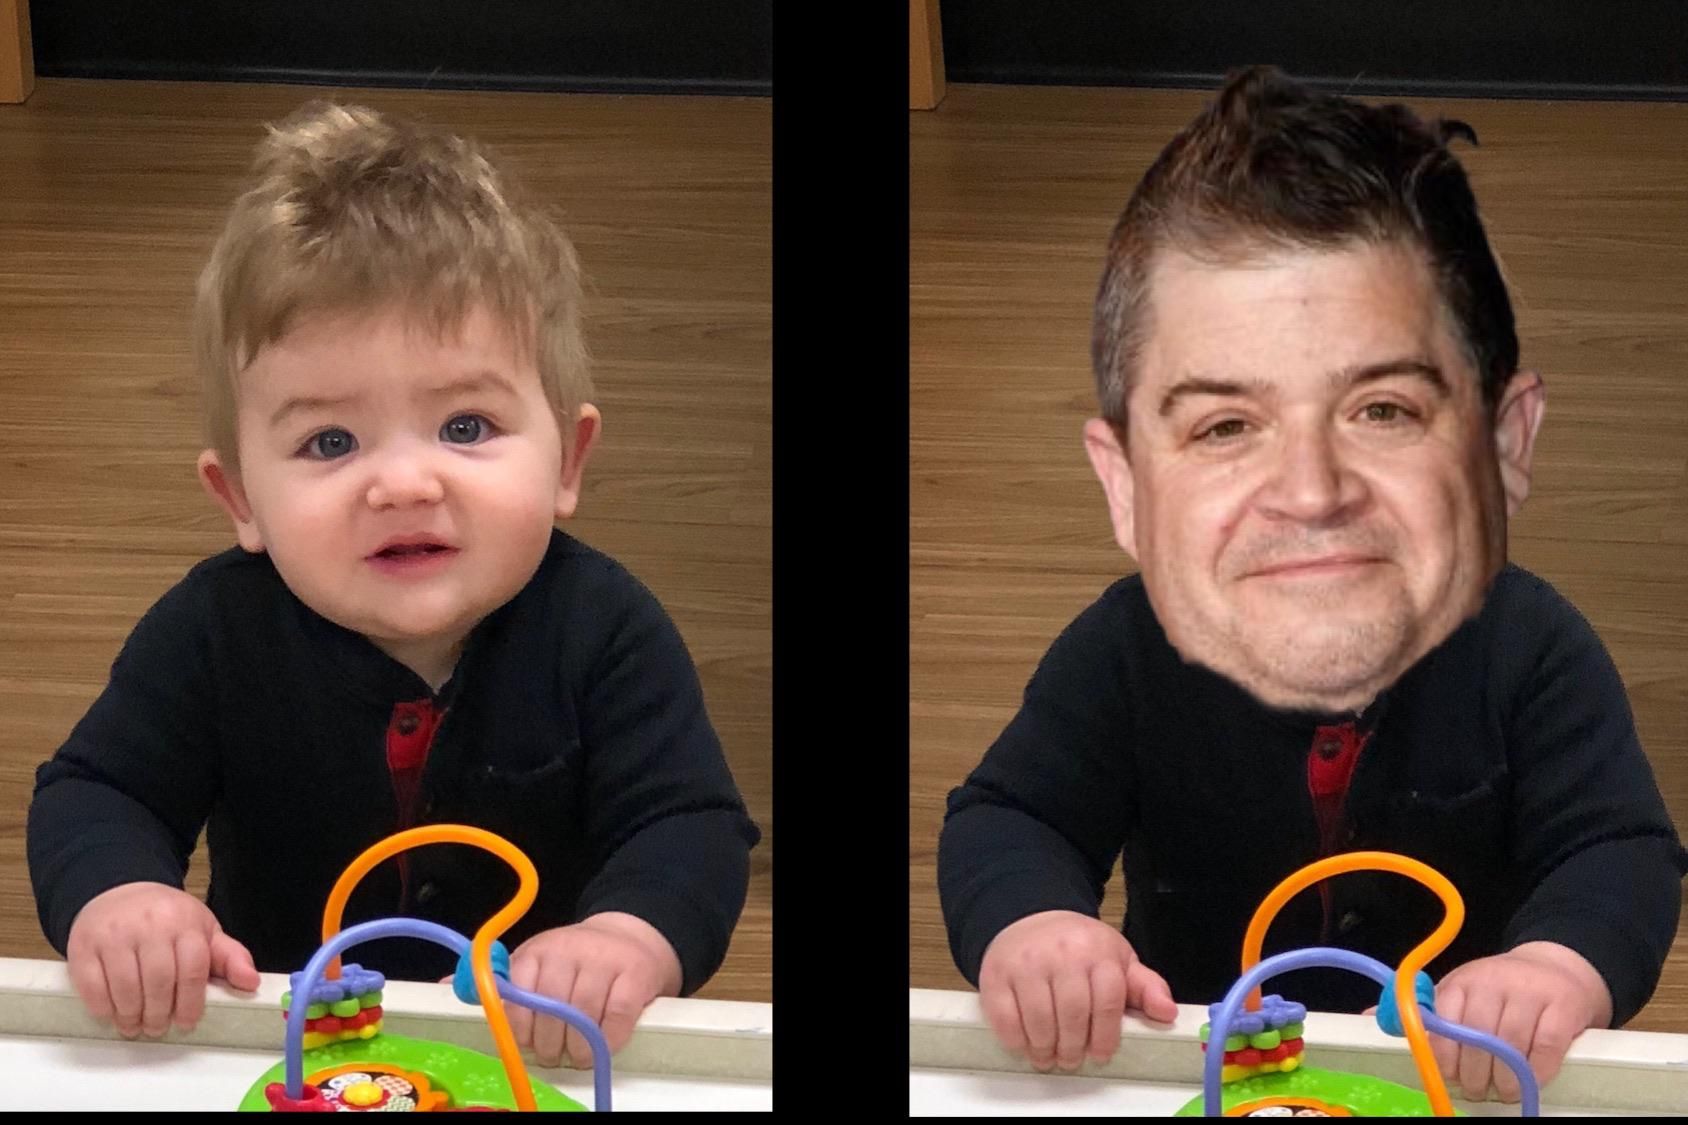 For the first year of his life, I questioned whether or not Patton Oswalt was the father of my son.